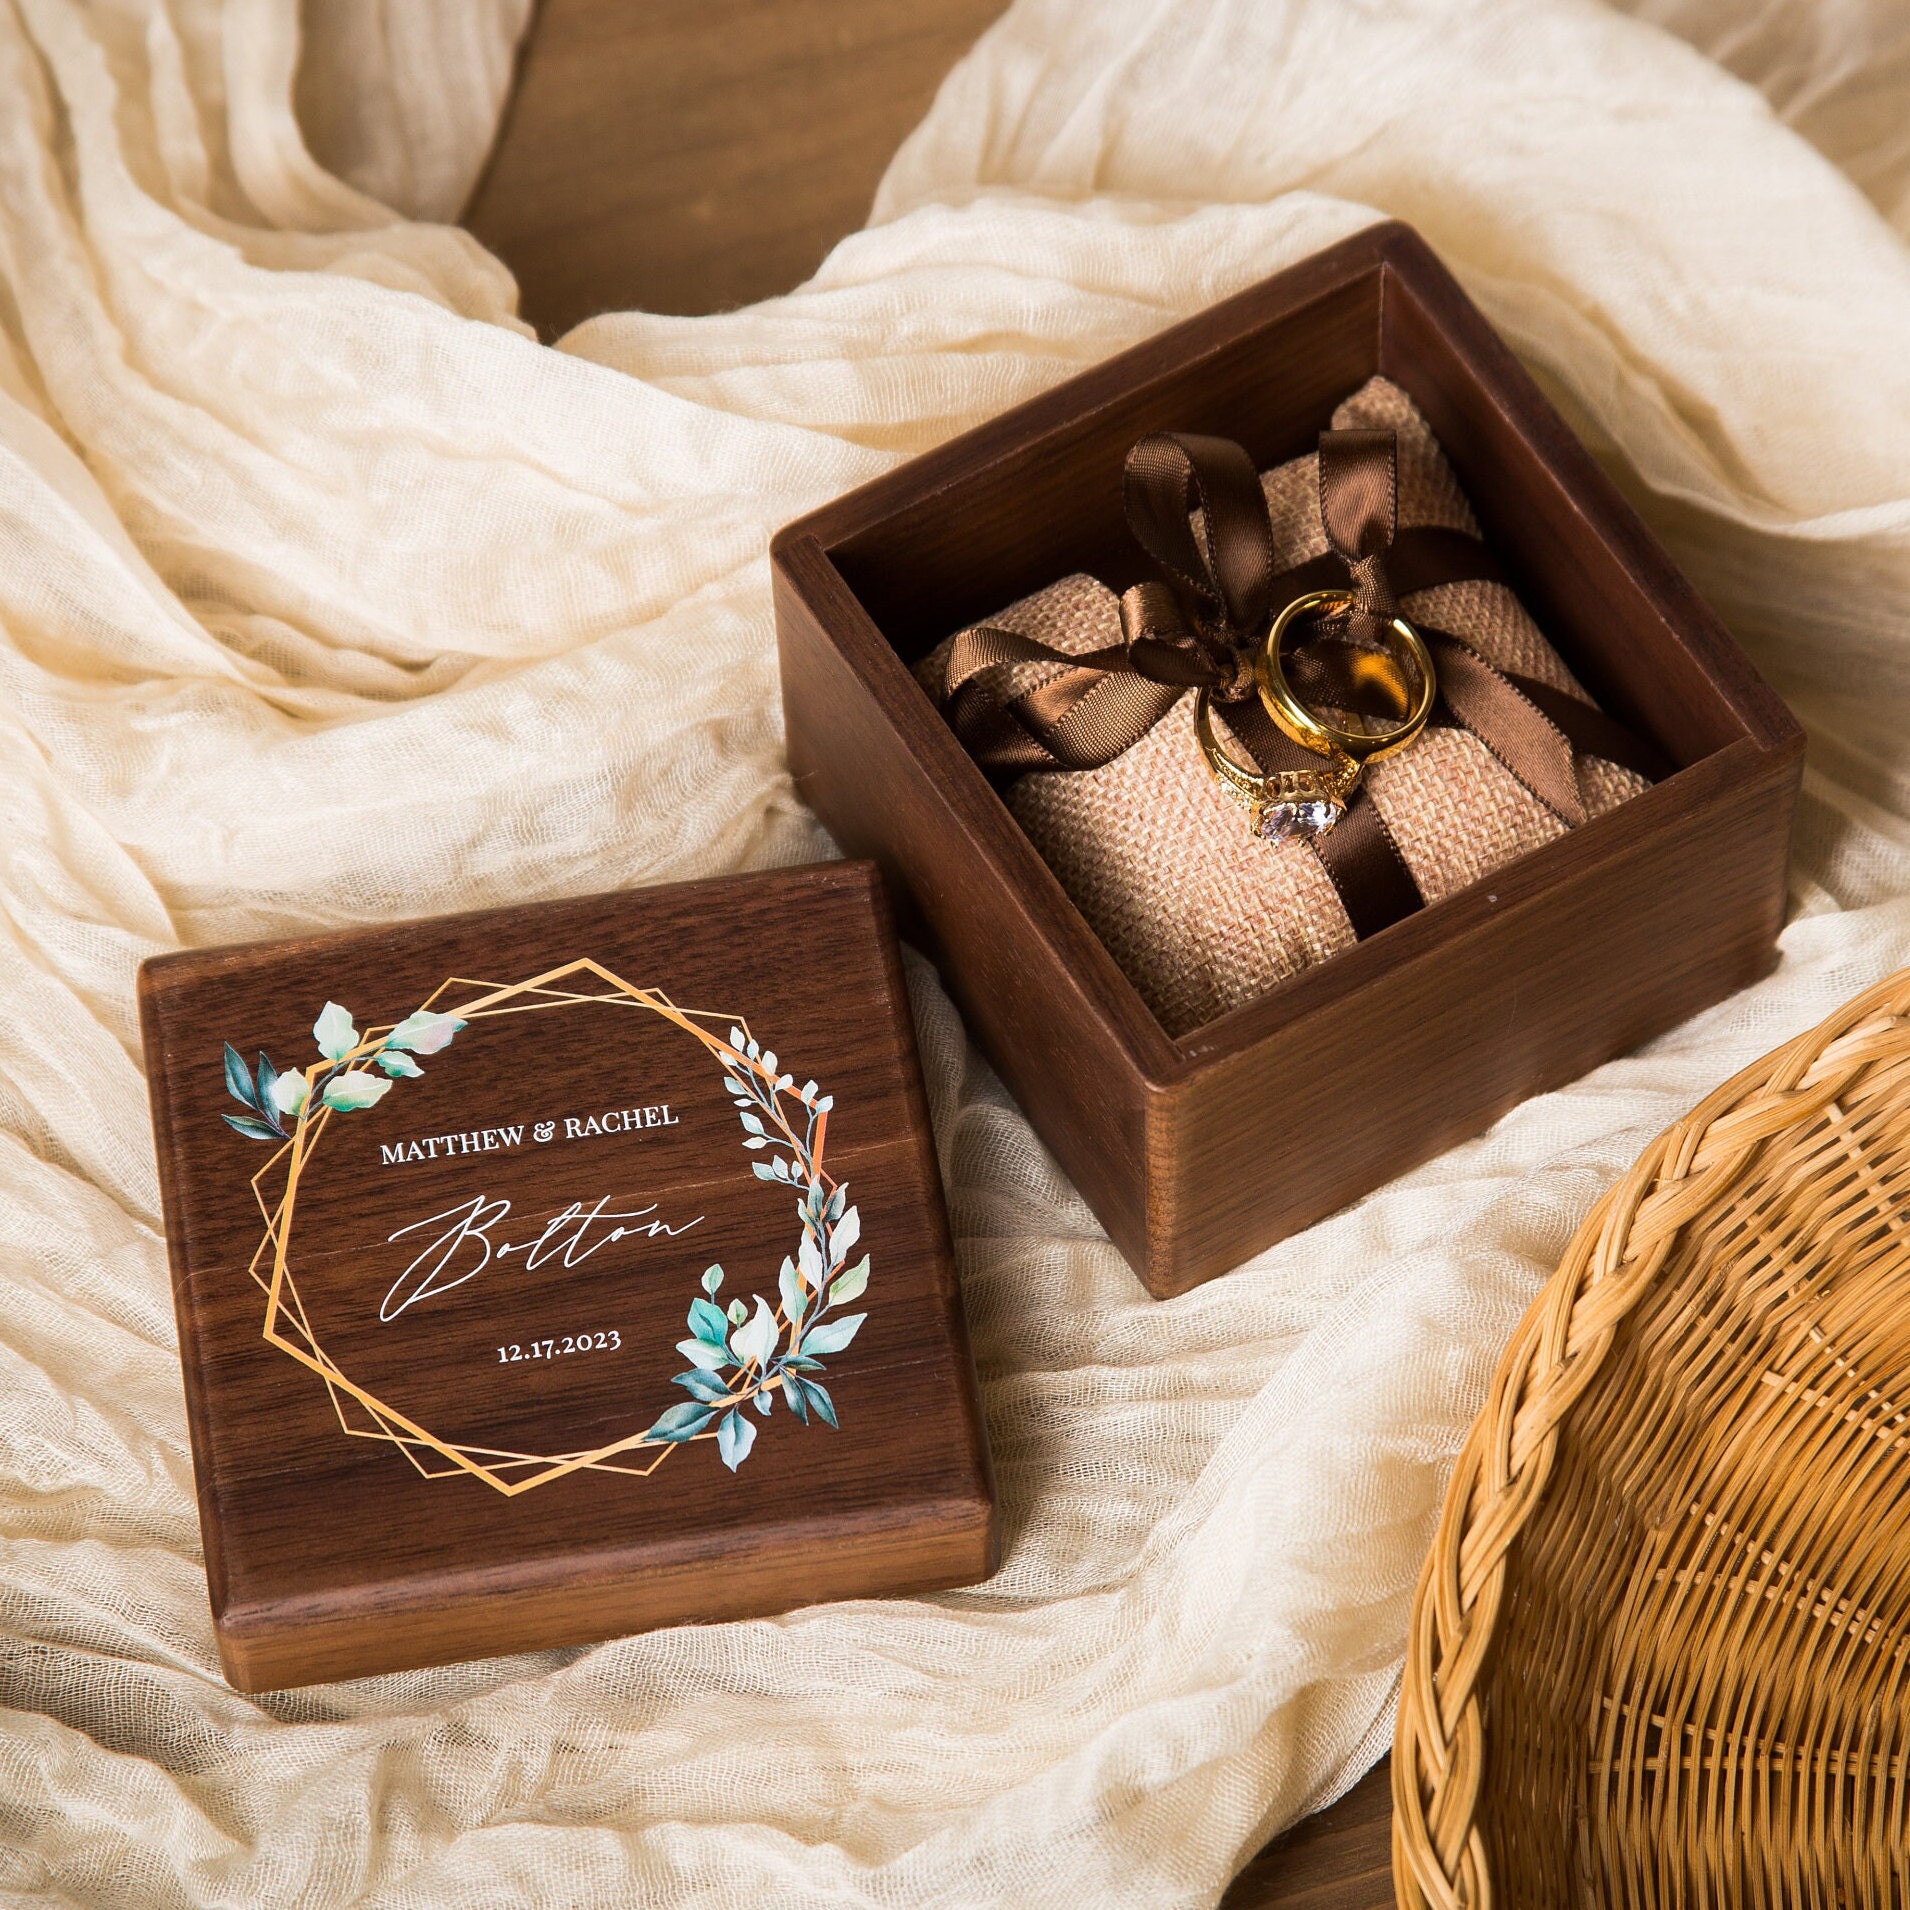 3D Butterflies – Lovely Ring Boxes